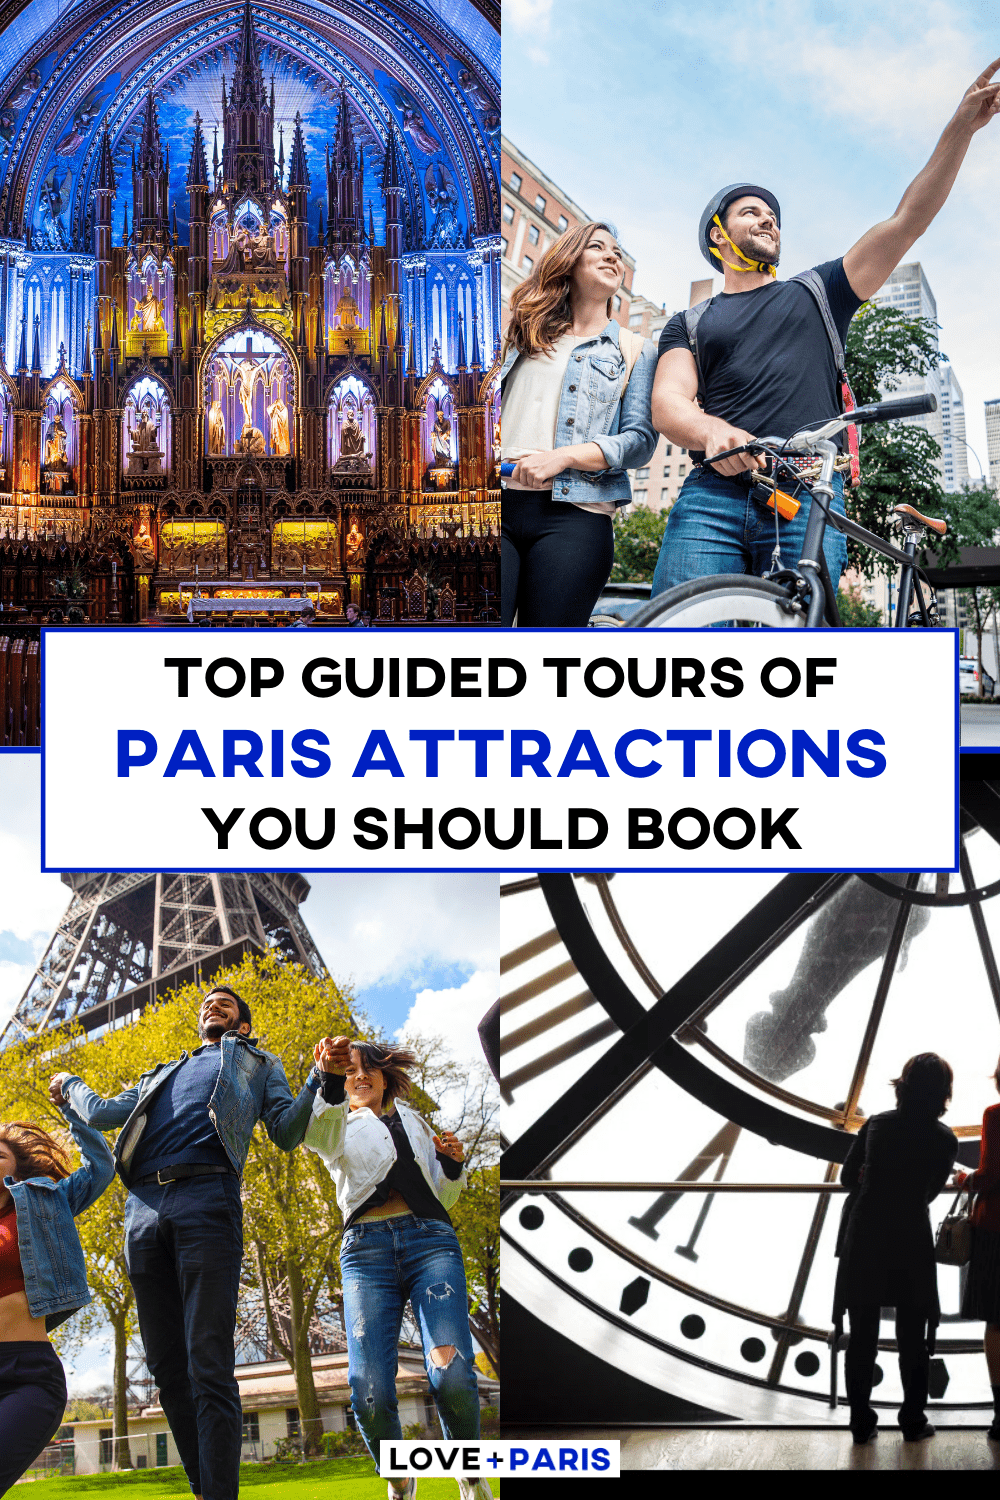 This is a photograph of a pinterest pin of four images in a grid format showing images of different attractions in Paris.